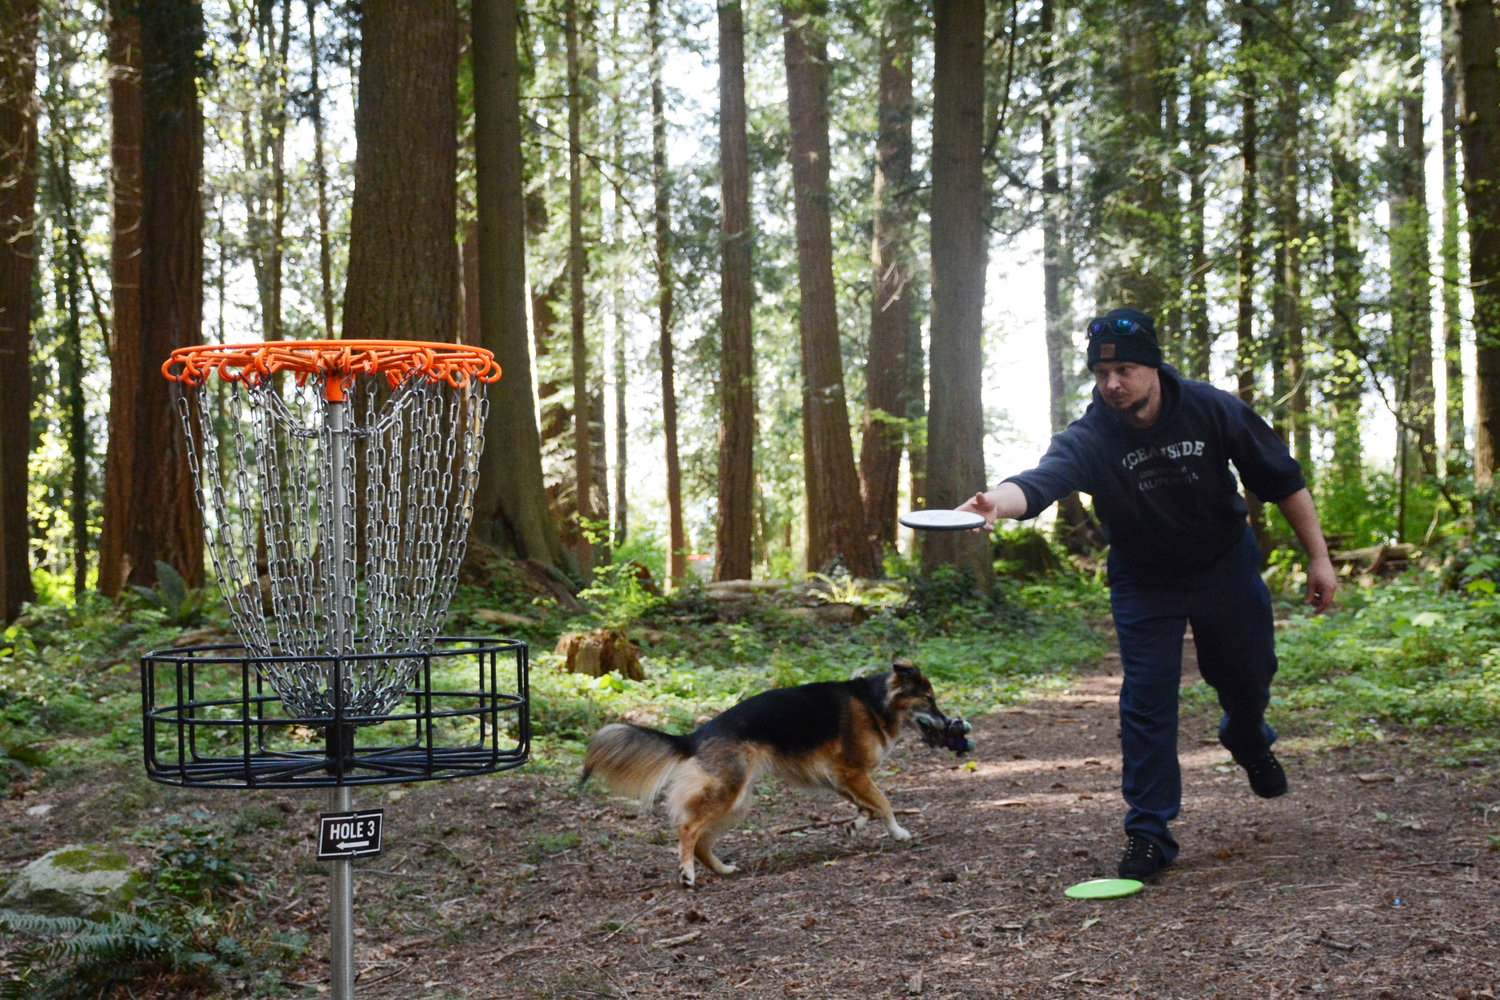 Mike Williams makes a shot on hole three of Lincoln Park’s disc golf course April 29. He said he plays about four times a week with his dog, Frankie.